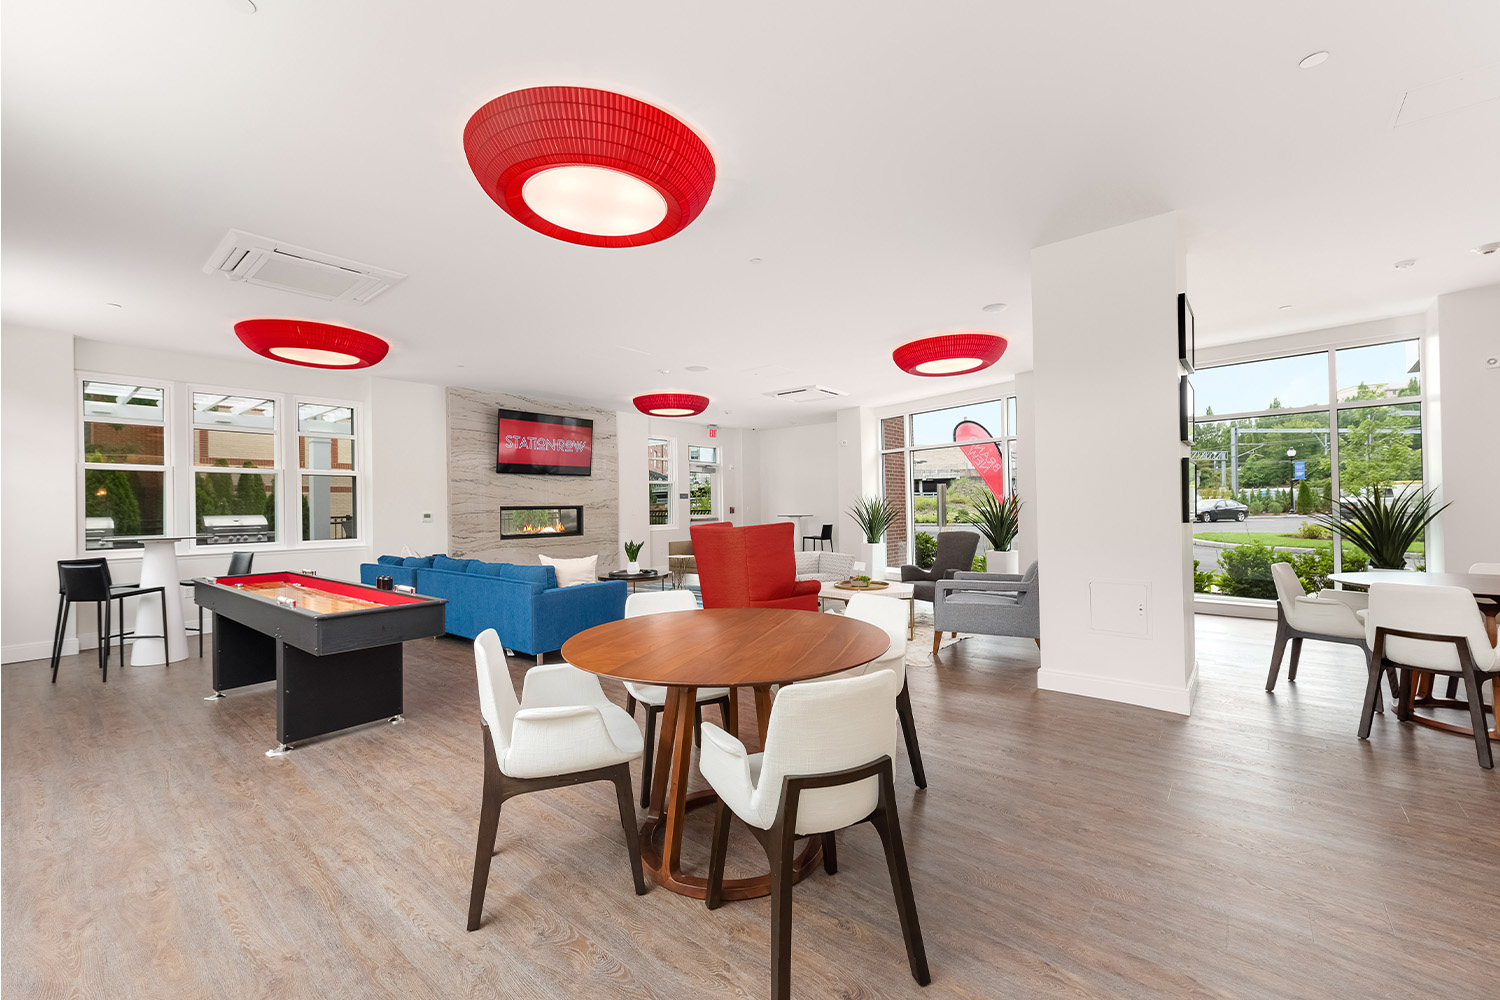 Bright living space with retro red light fixtures, pool able, and seating 